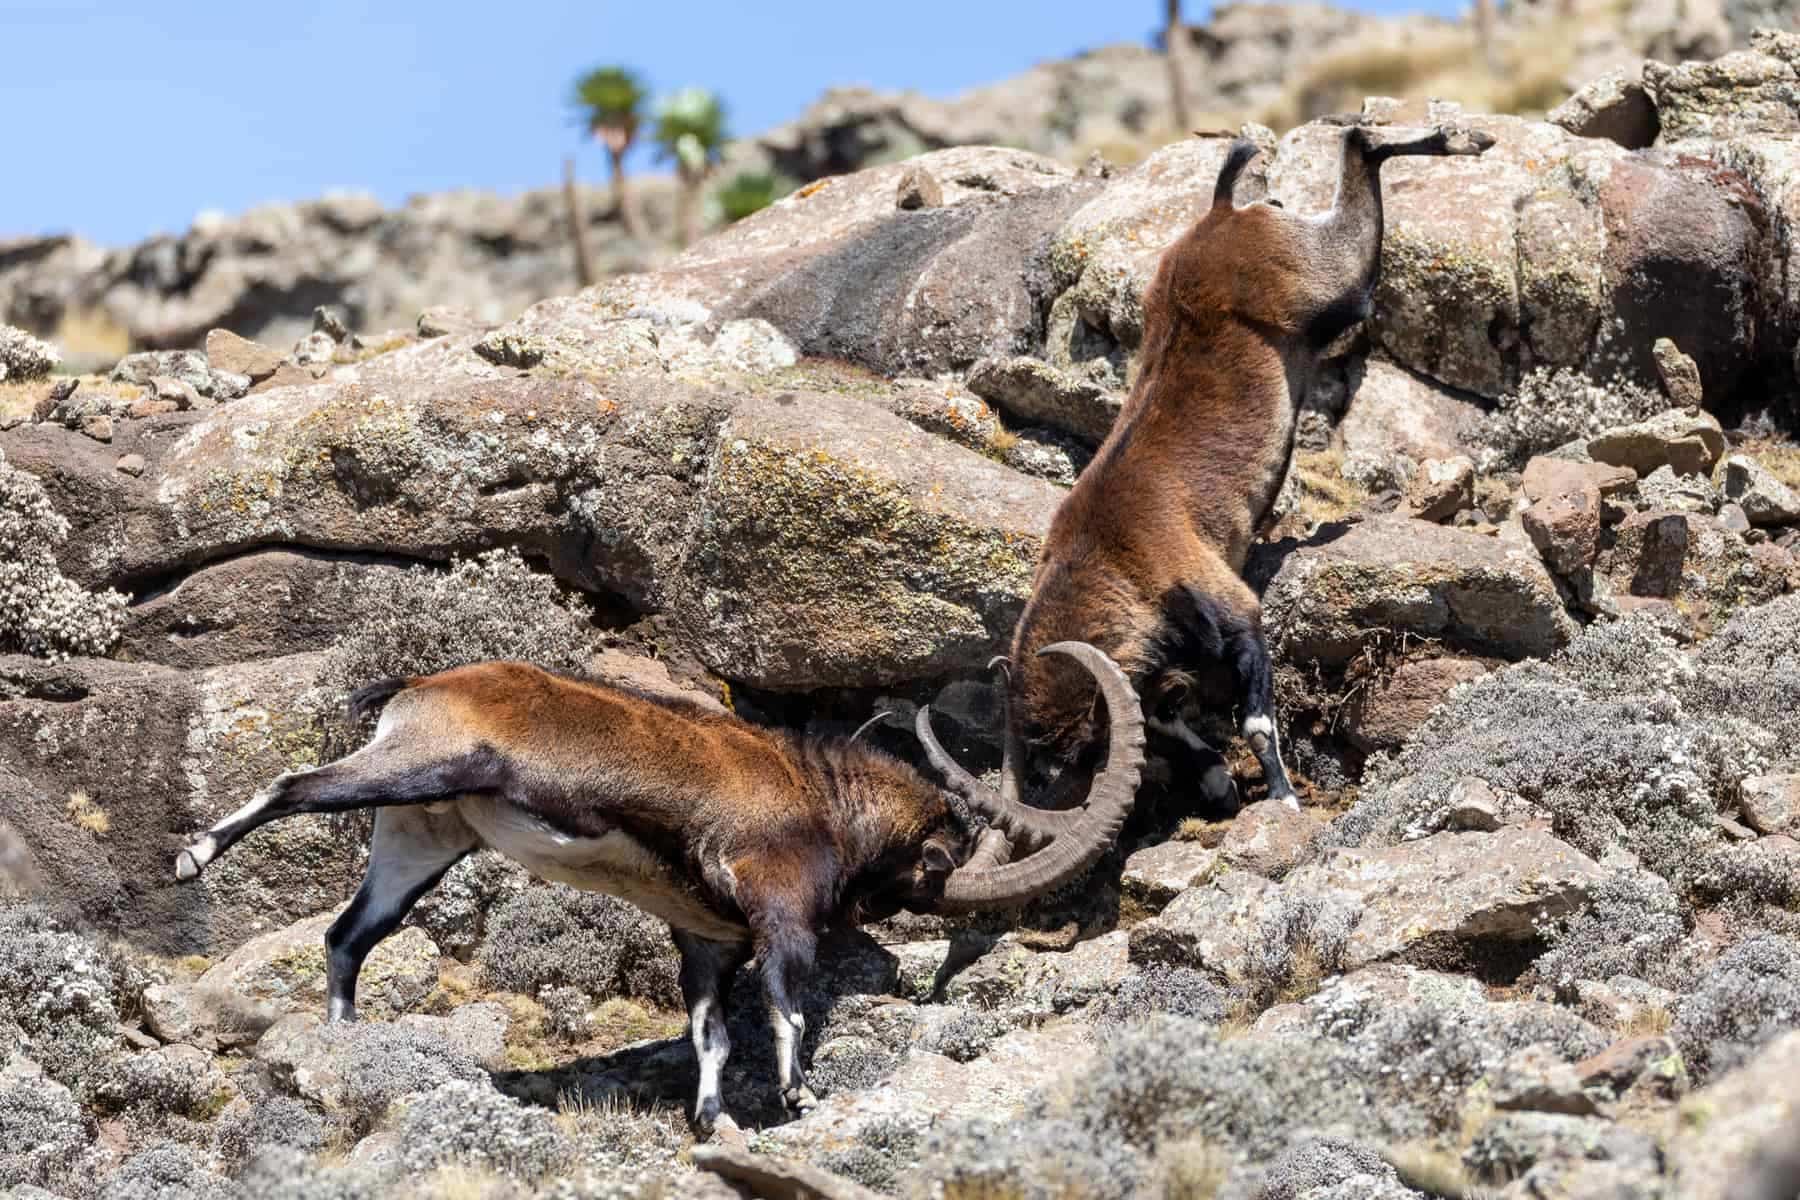 Very rare Walia ibex fighting, Capra walia, rarest ibex in world. Only about 500 individuals survived in Simien Mountains in Northern Ethiopia, Africa